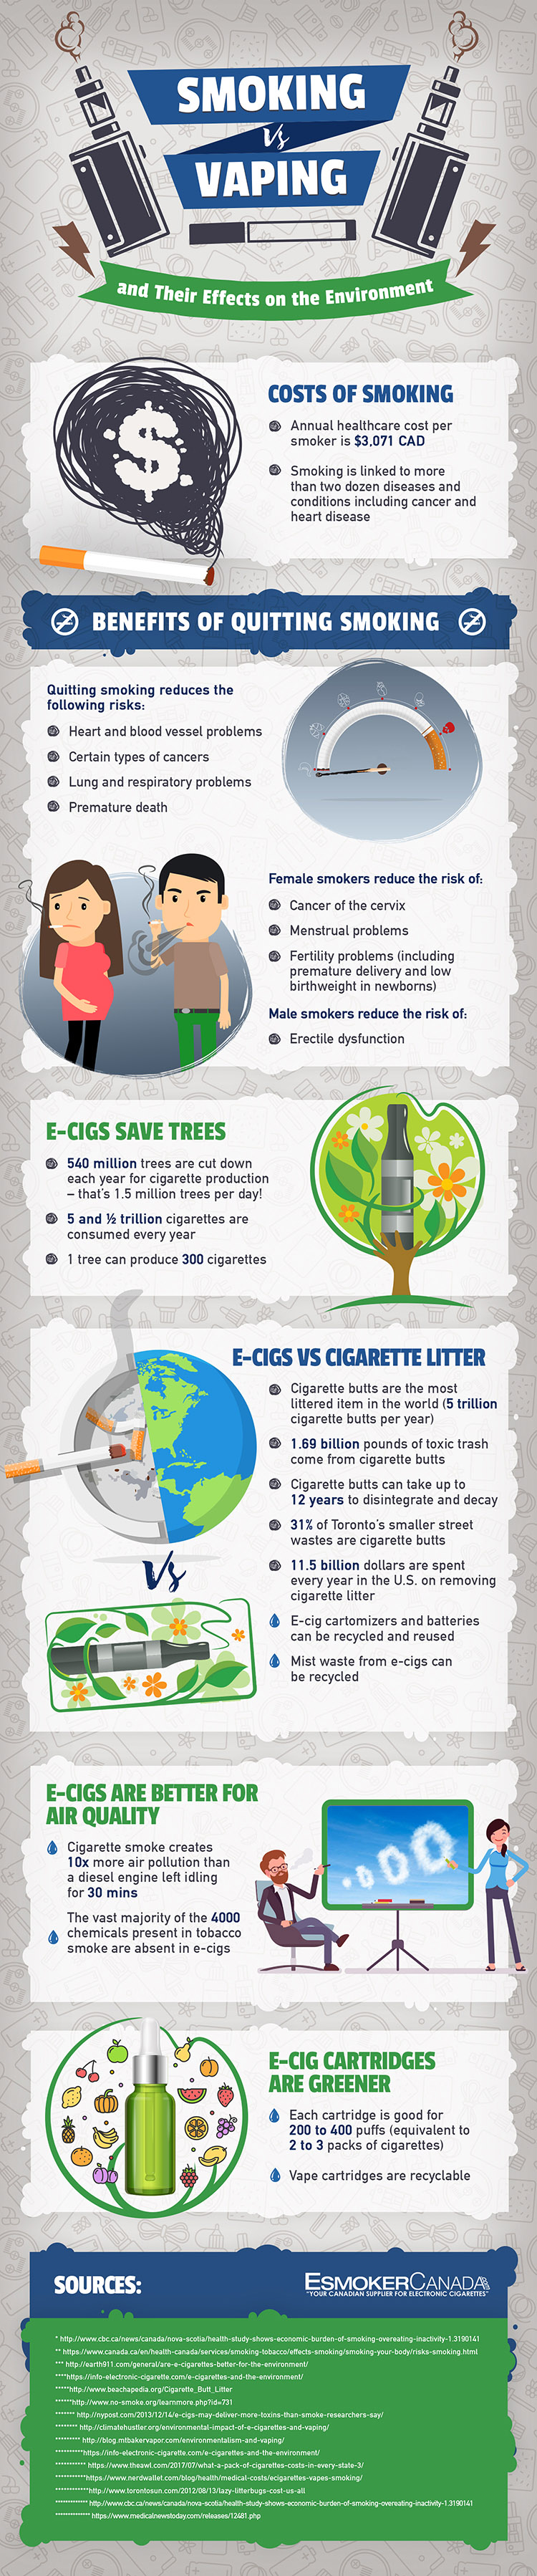 Smoking Vs Vaping and Their Effects on the Environment